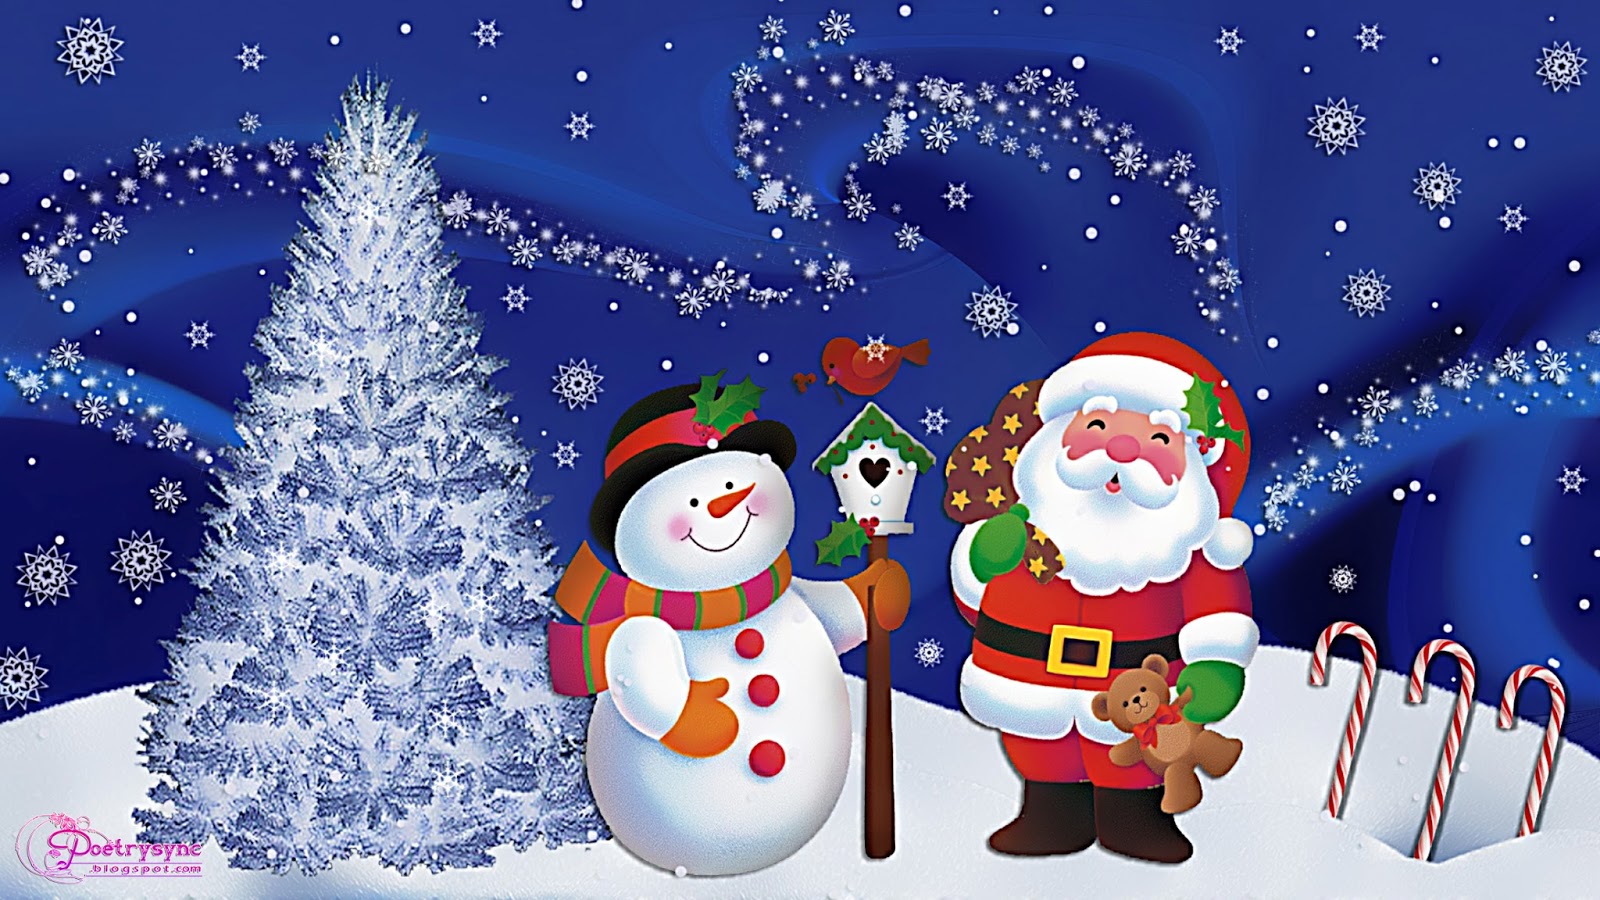 Christmas Wishes And Greetings Wallpaper With Santa Claus